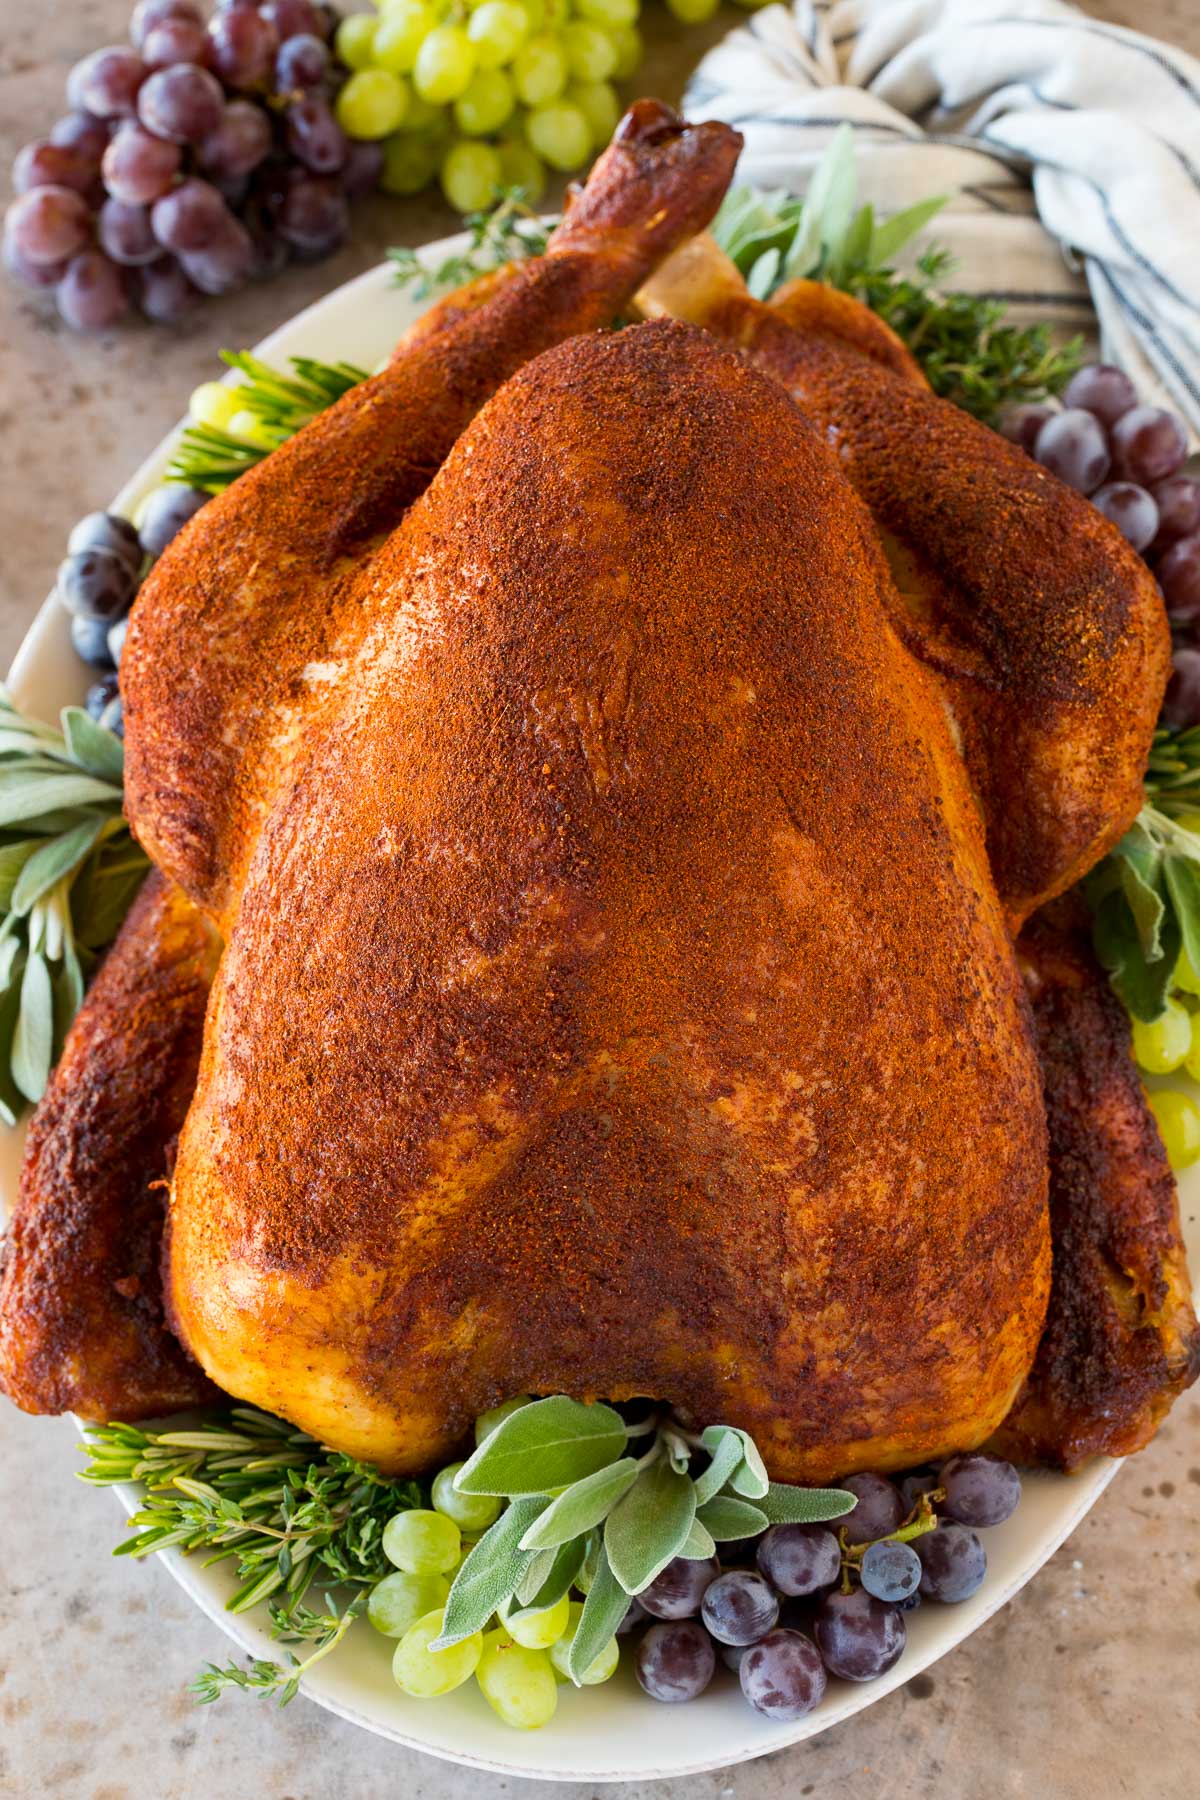 A cooked turkey coated in homemade smoked turkey rub.